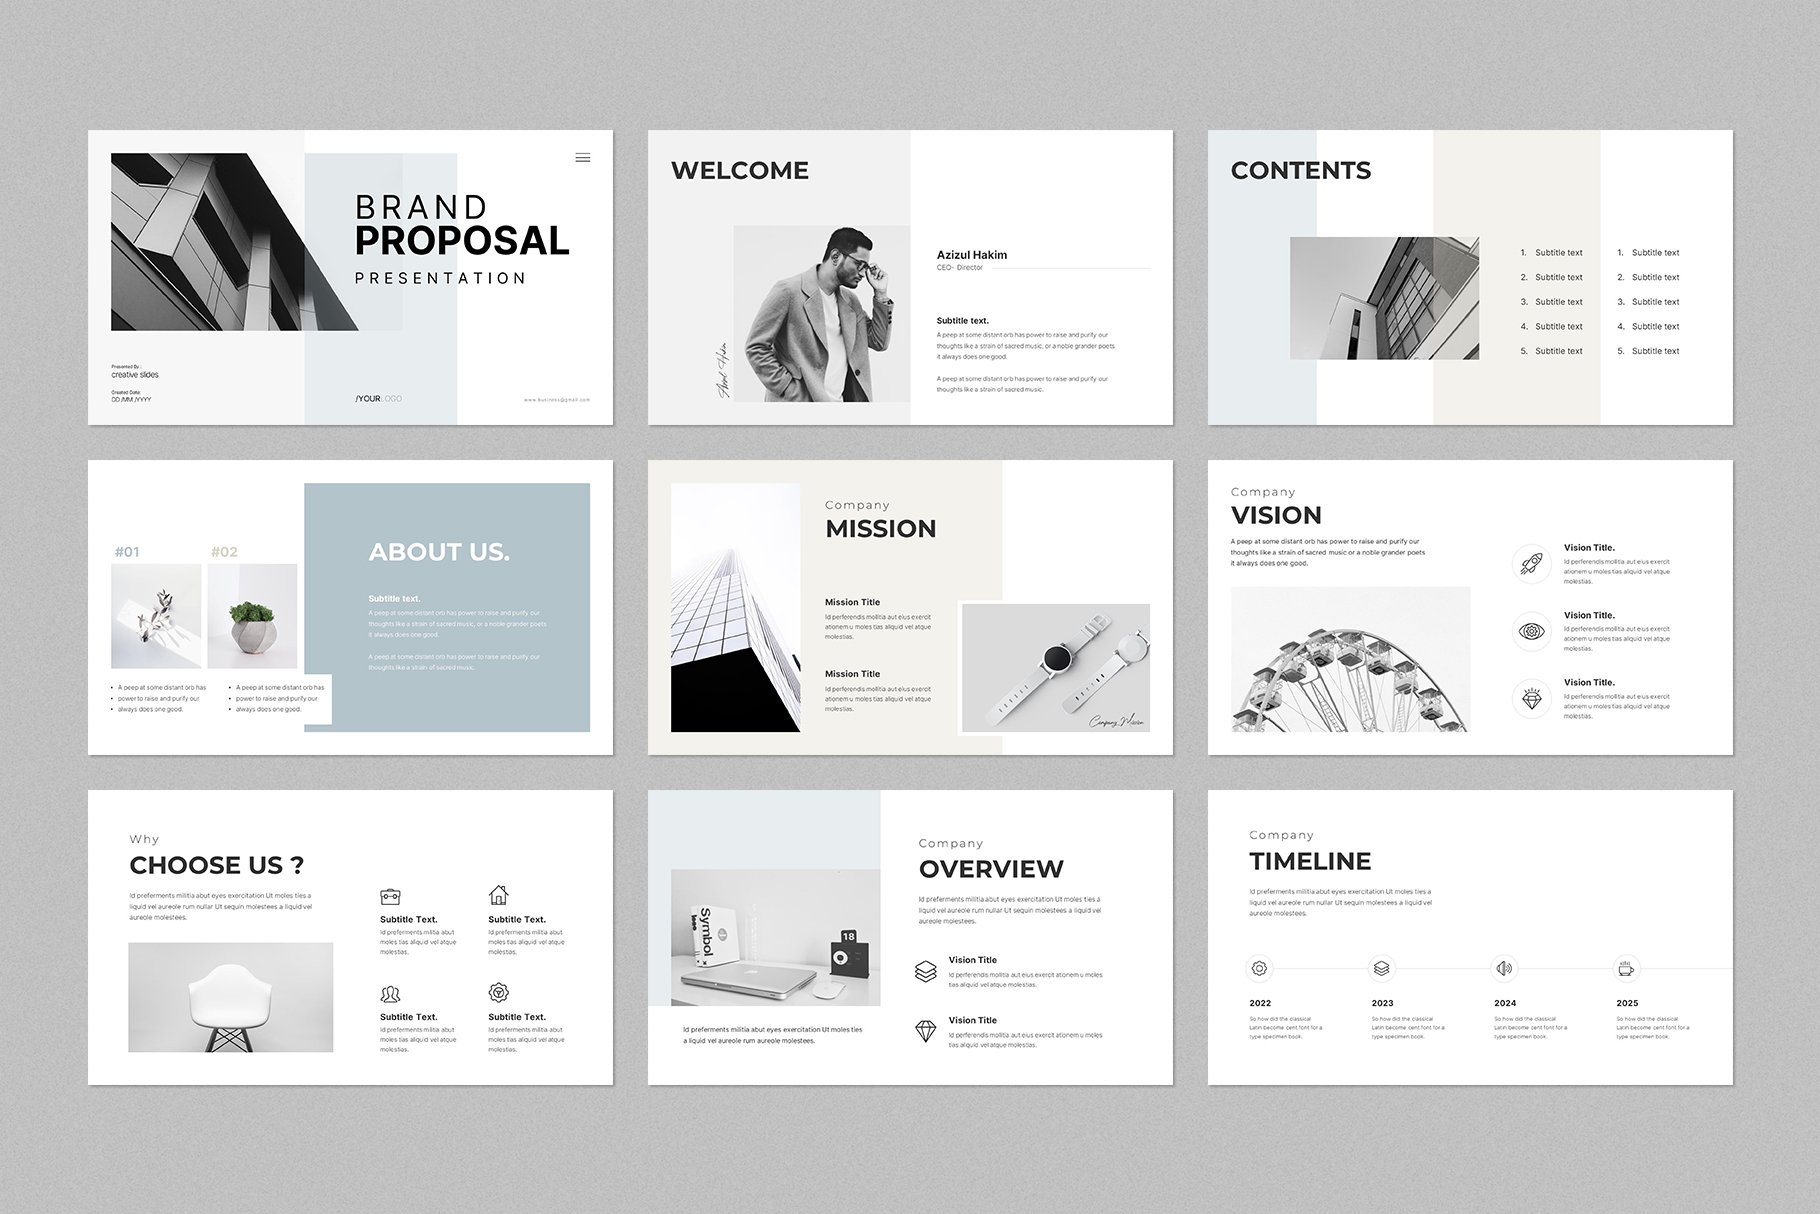 Brand Proposal PowerPoint Template - Design Cuts